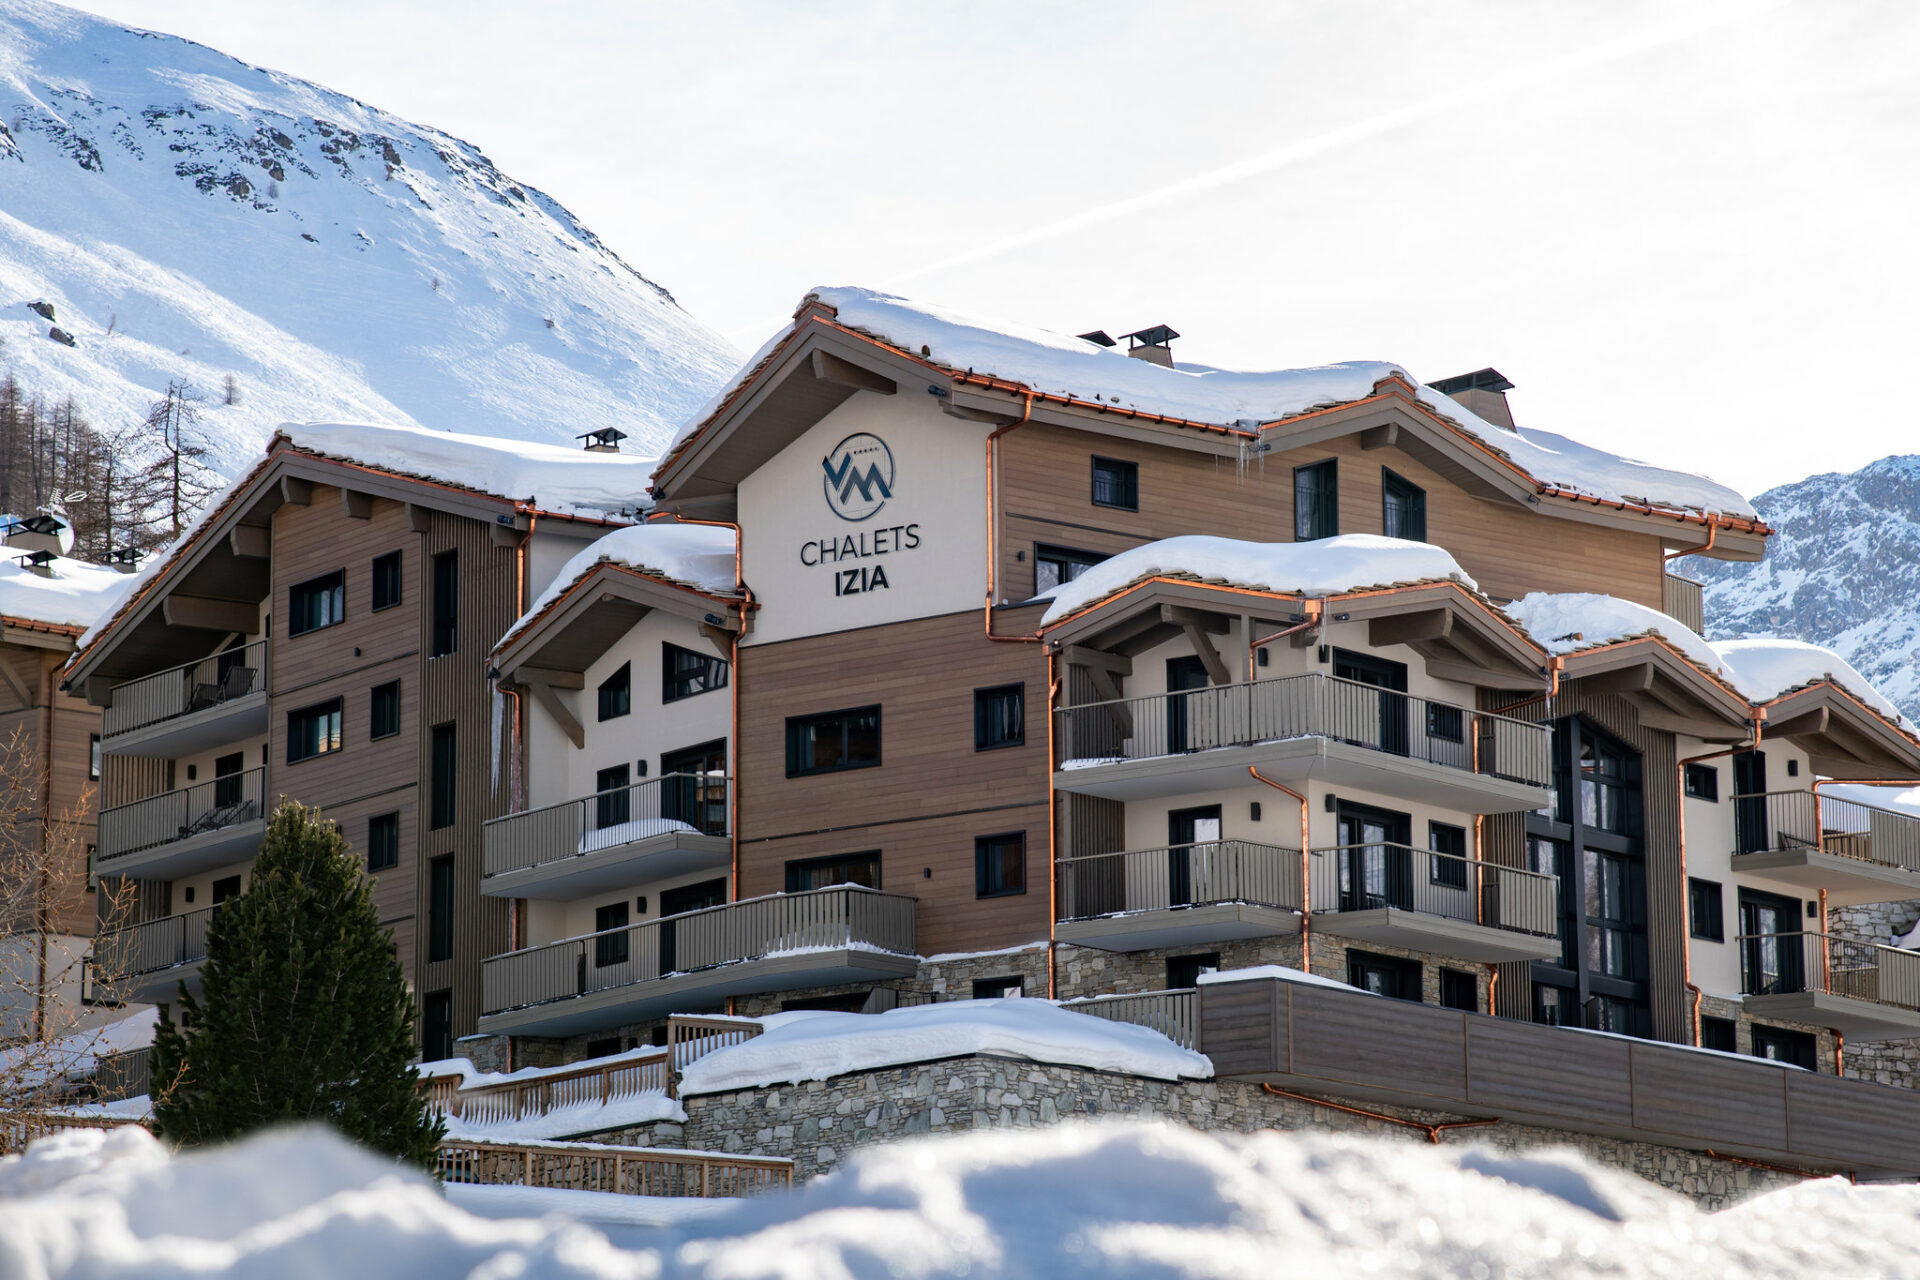 Chalet Izia in Val d'Isere